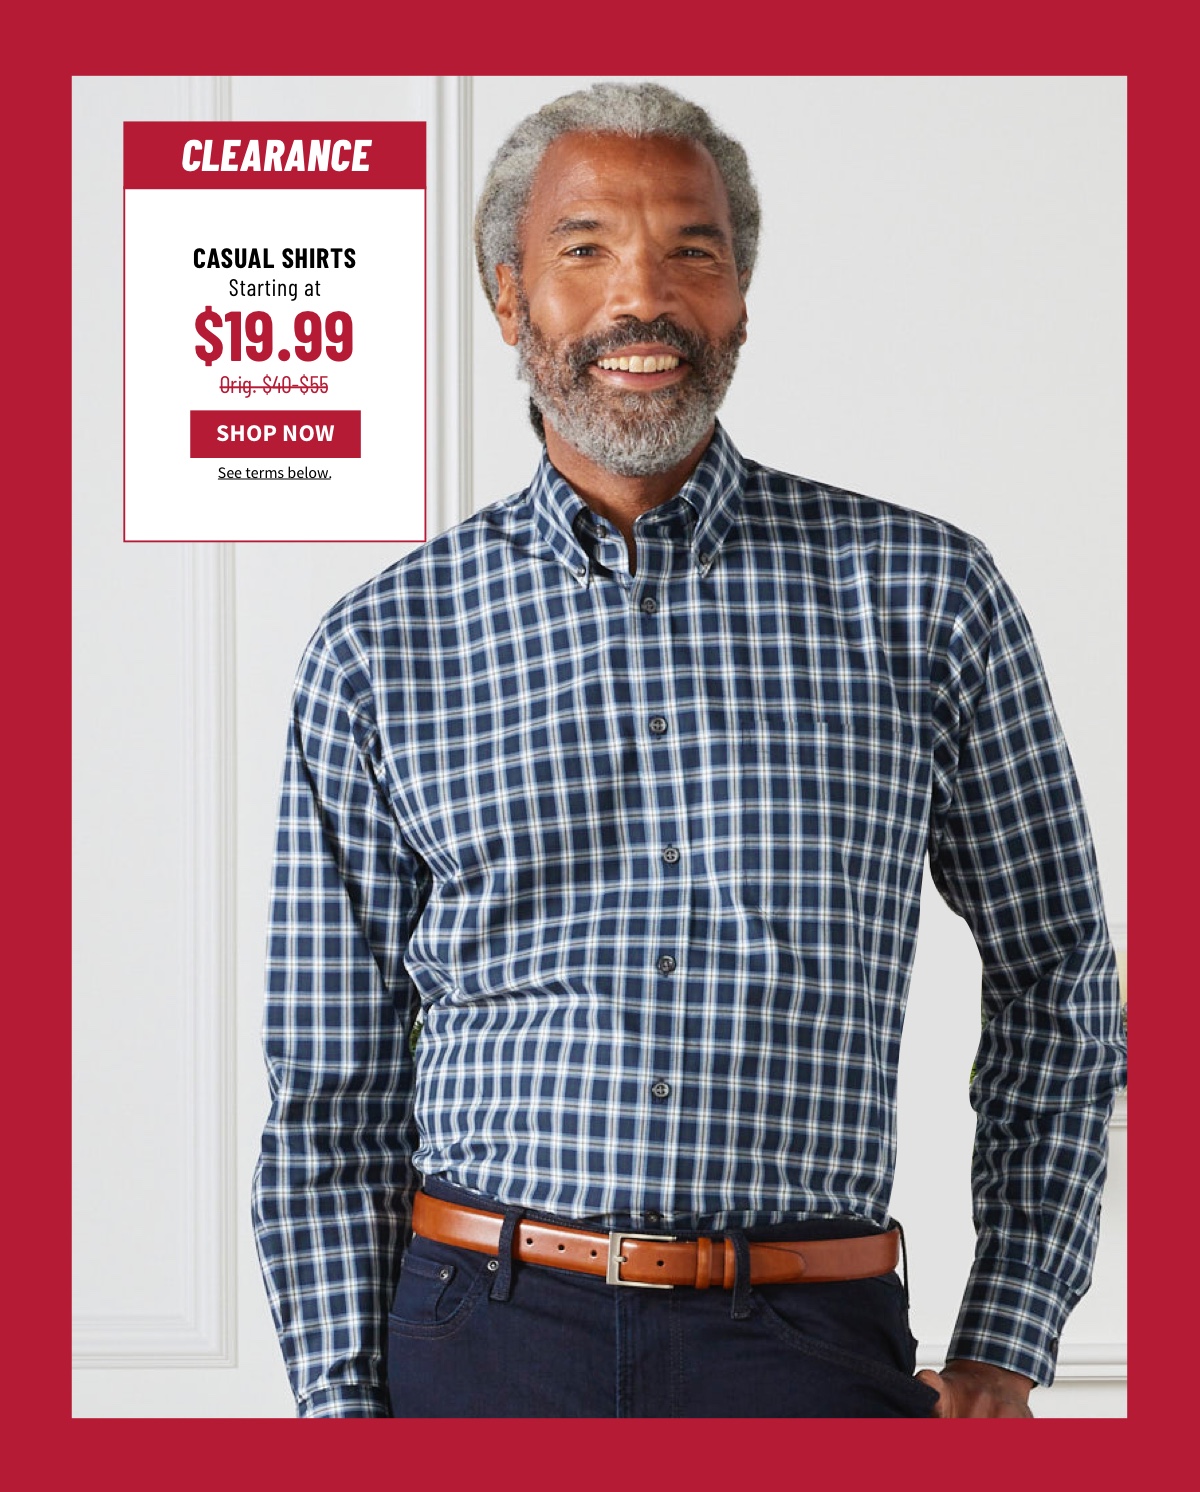 Clearance Casual Shirts Starting at $19.99 Orig. $40-$55 Shop Now See terms below.